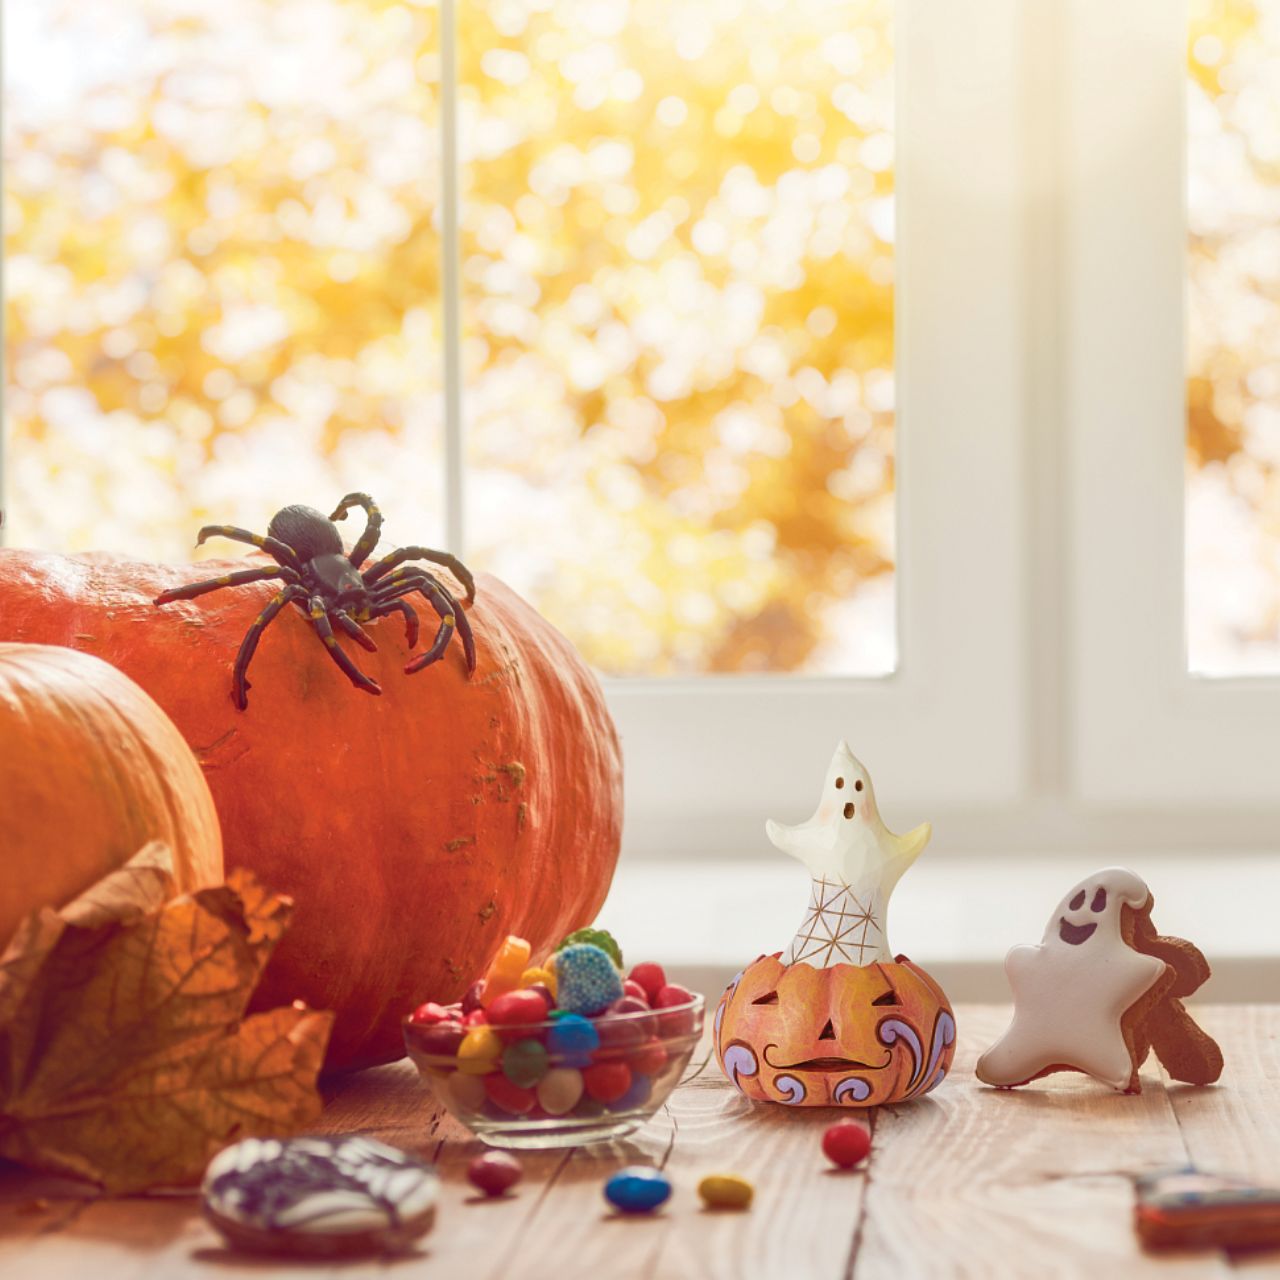 Heartwood Creek Halloween Pumpkin Mini Figurine  Handcrafted in breath-taking detail, this delightful Halloween Pumpkin Mini Figurine is beautifully decorated in Jim Shore's subtle combination of traditional quilt. Packaged in a branded gift box.